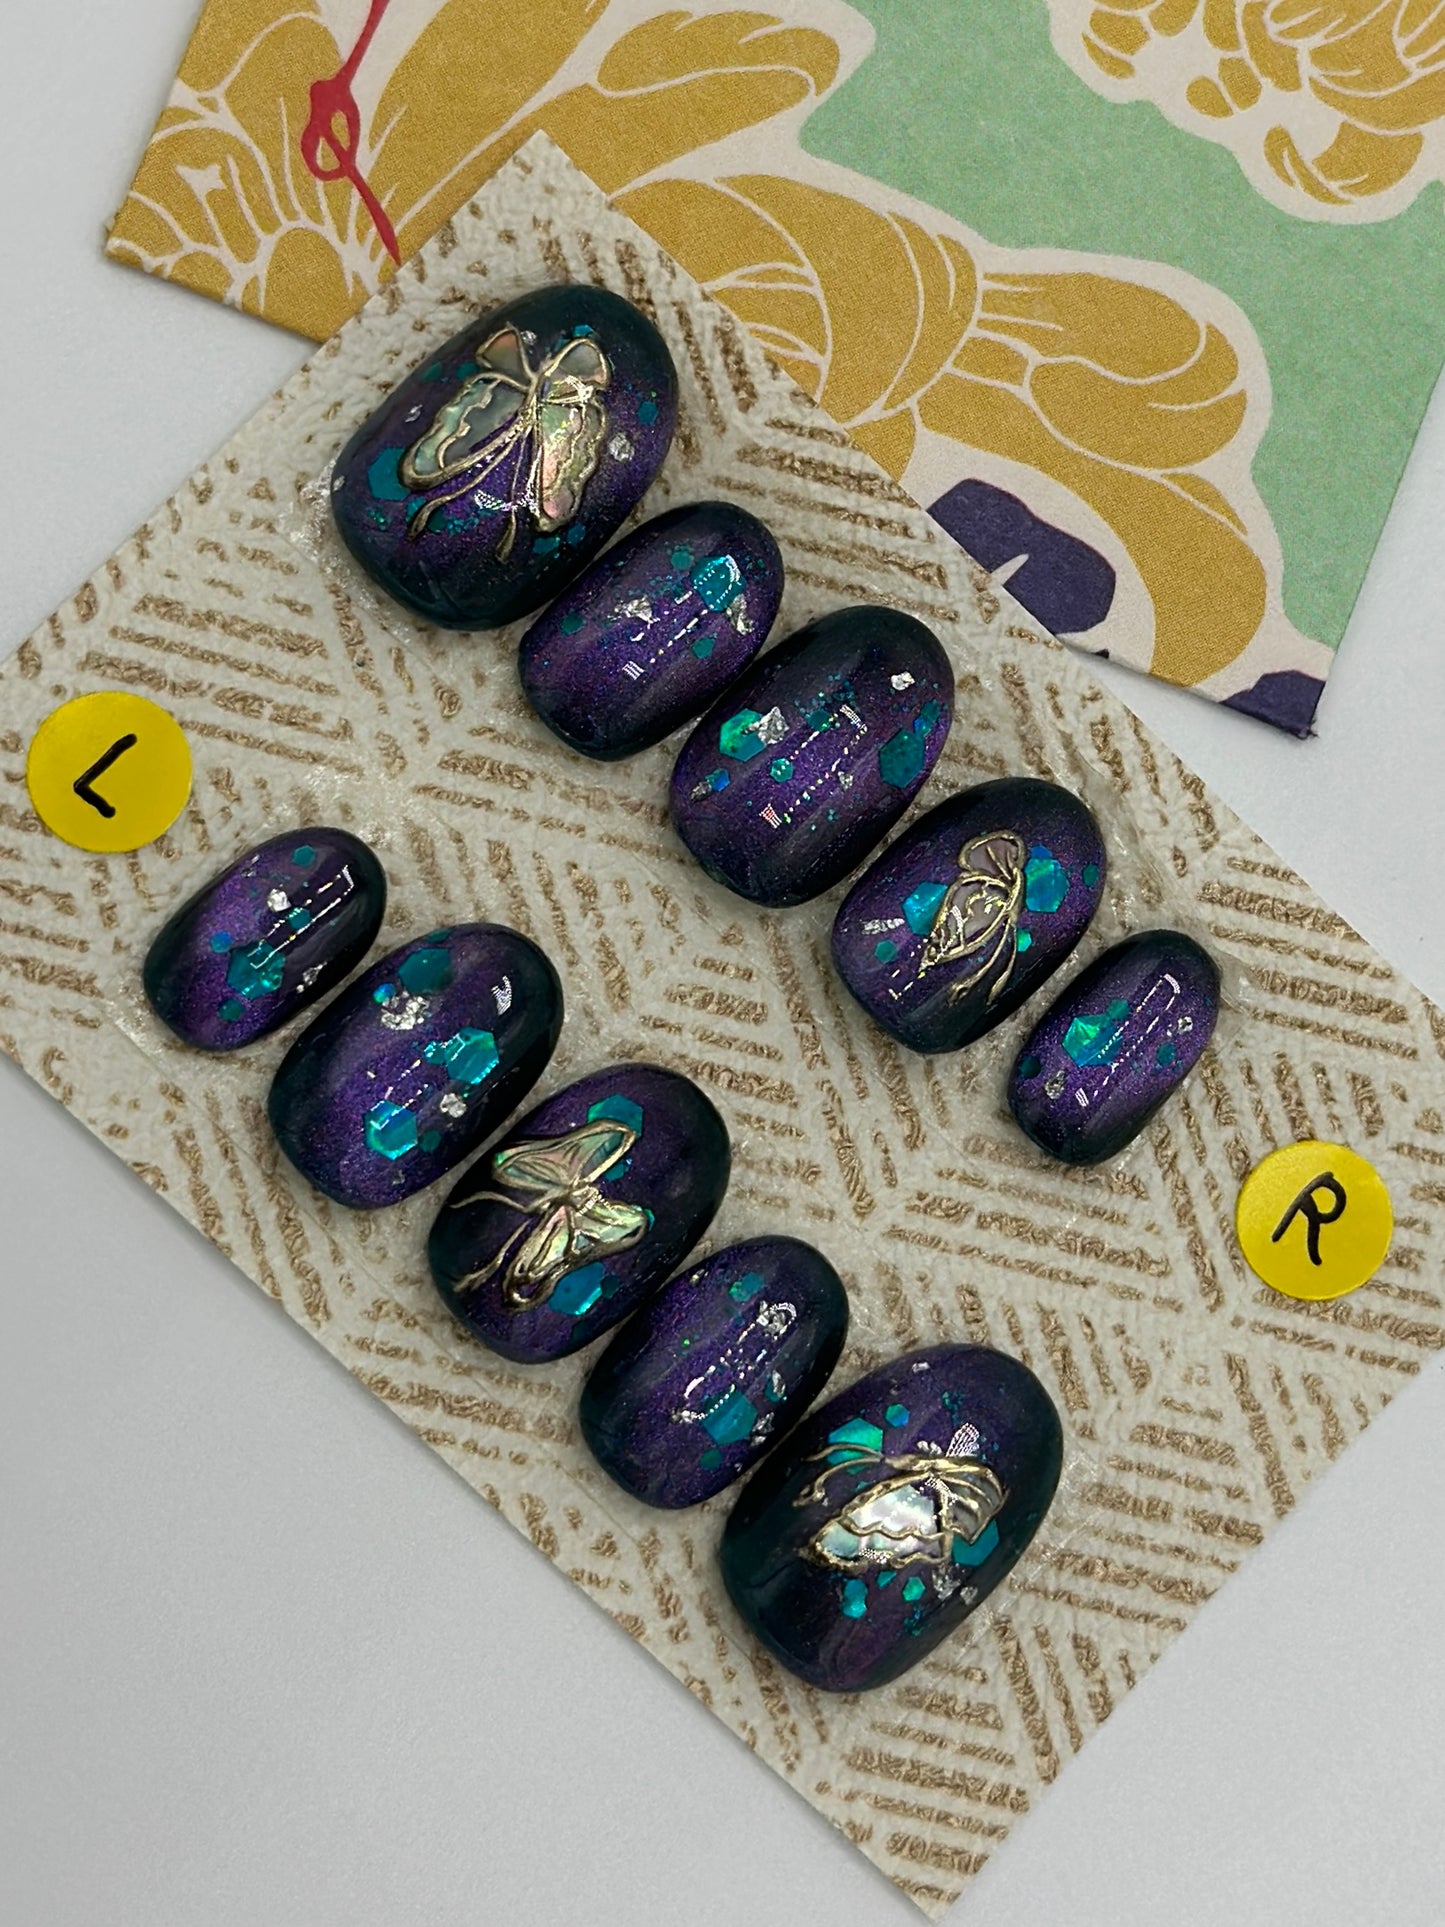 【Glossy navy,Butterfly in the night】Size:S（Japanese Pattern Nail Tips）Handmade Reusable Press On Nails,Gel nails,Glue On Nails,Japanese Gifts